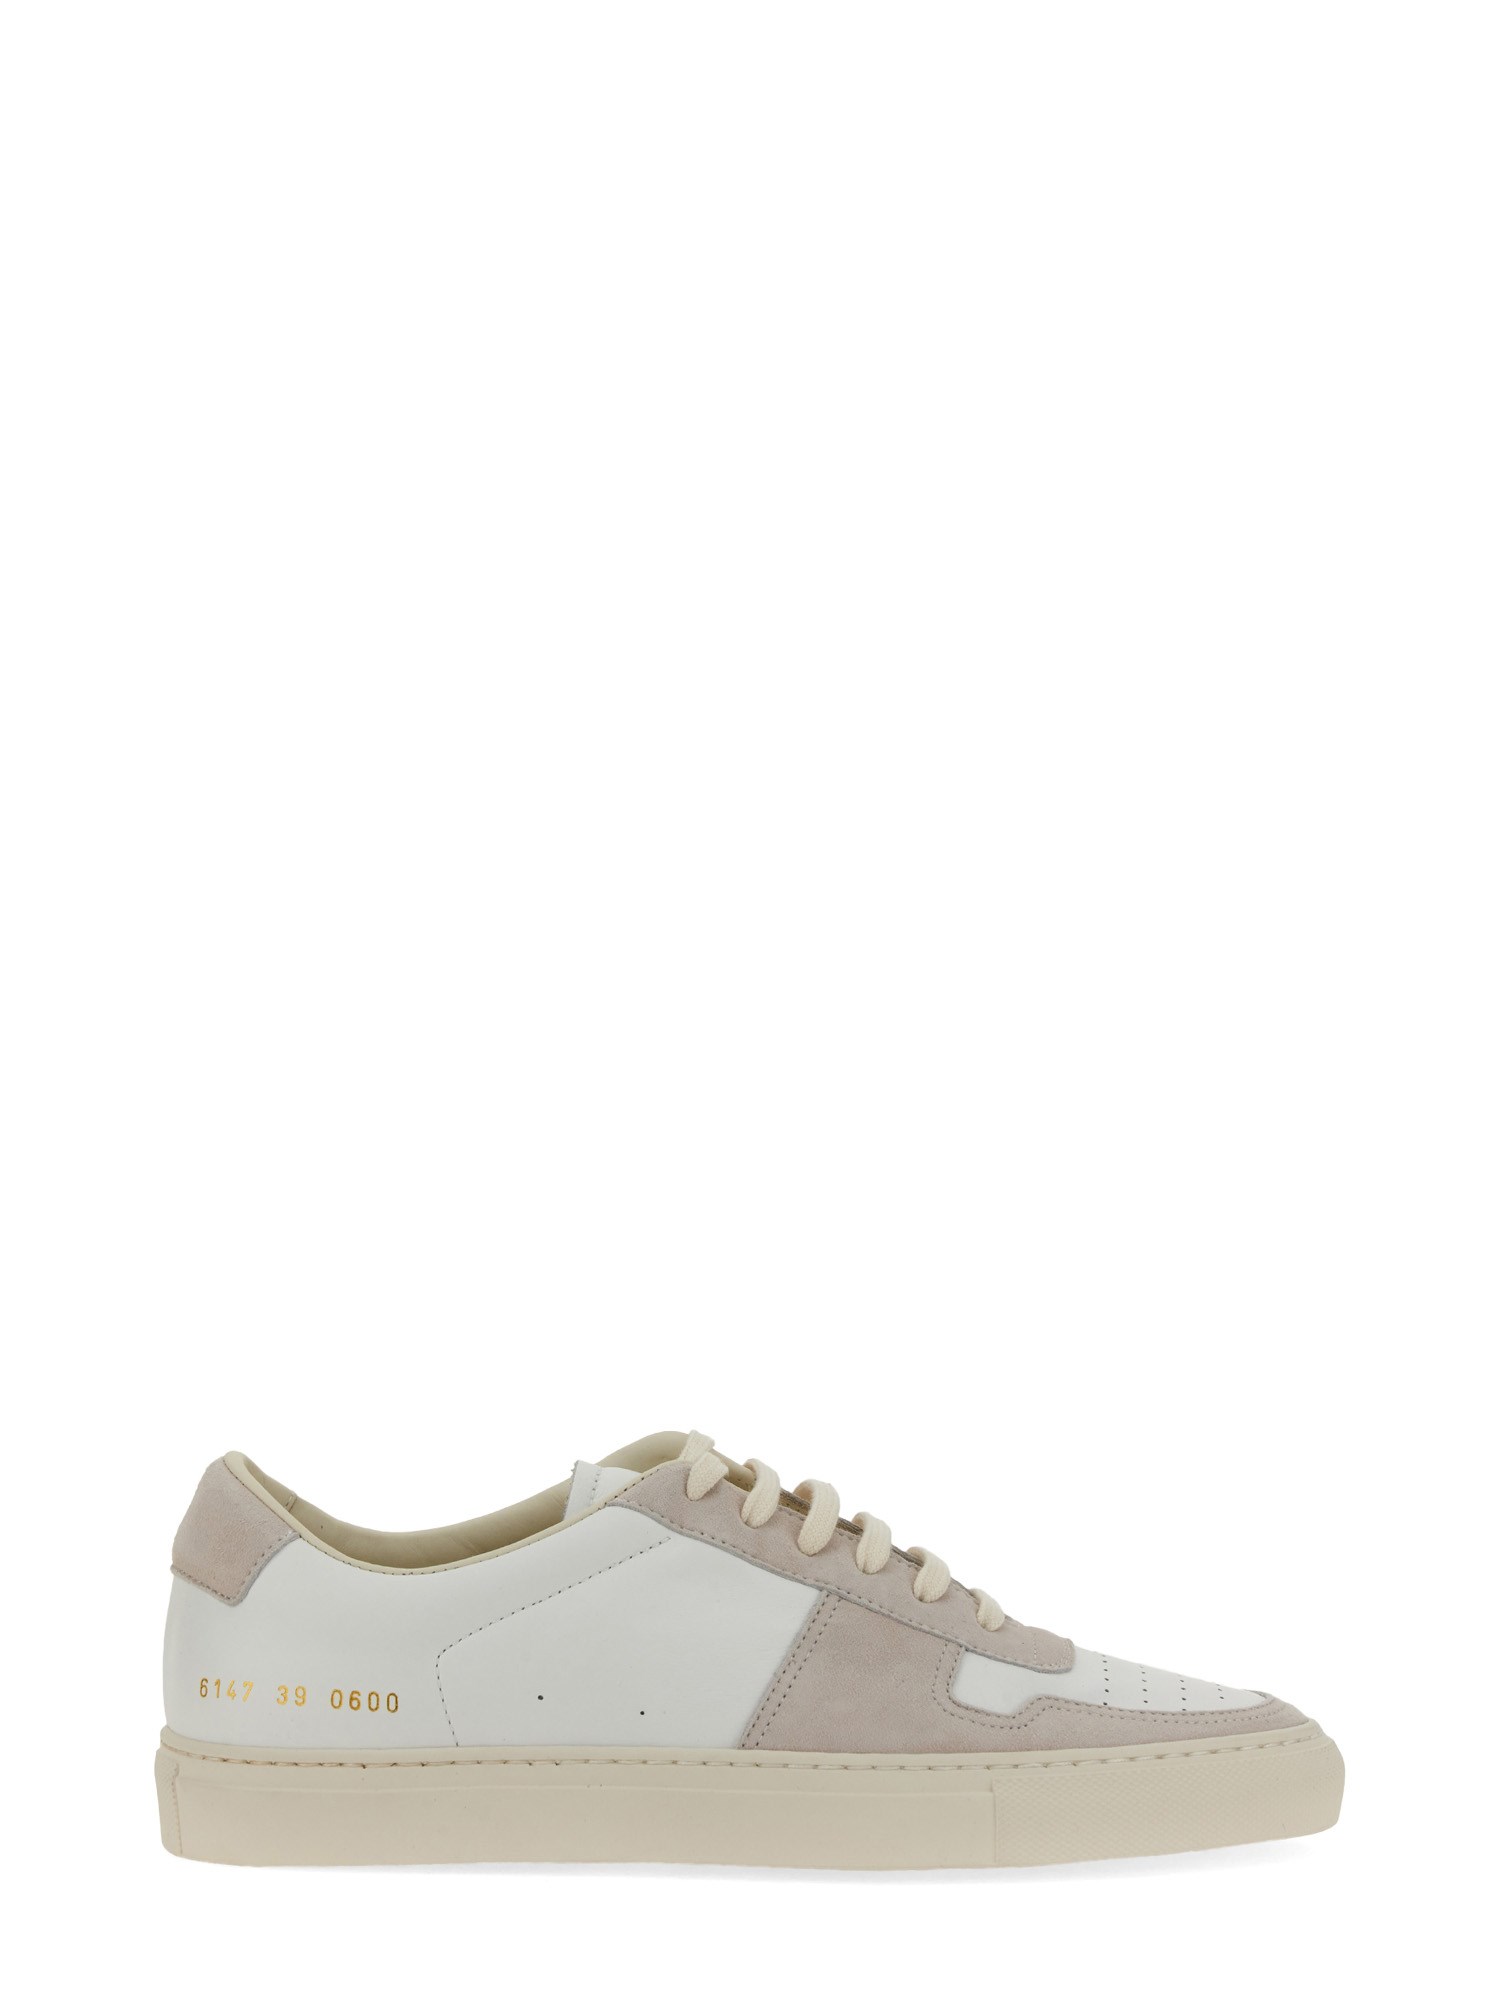 COMMON PROJECTS common projects "bball" sneaker